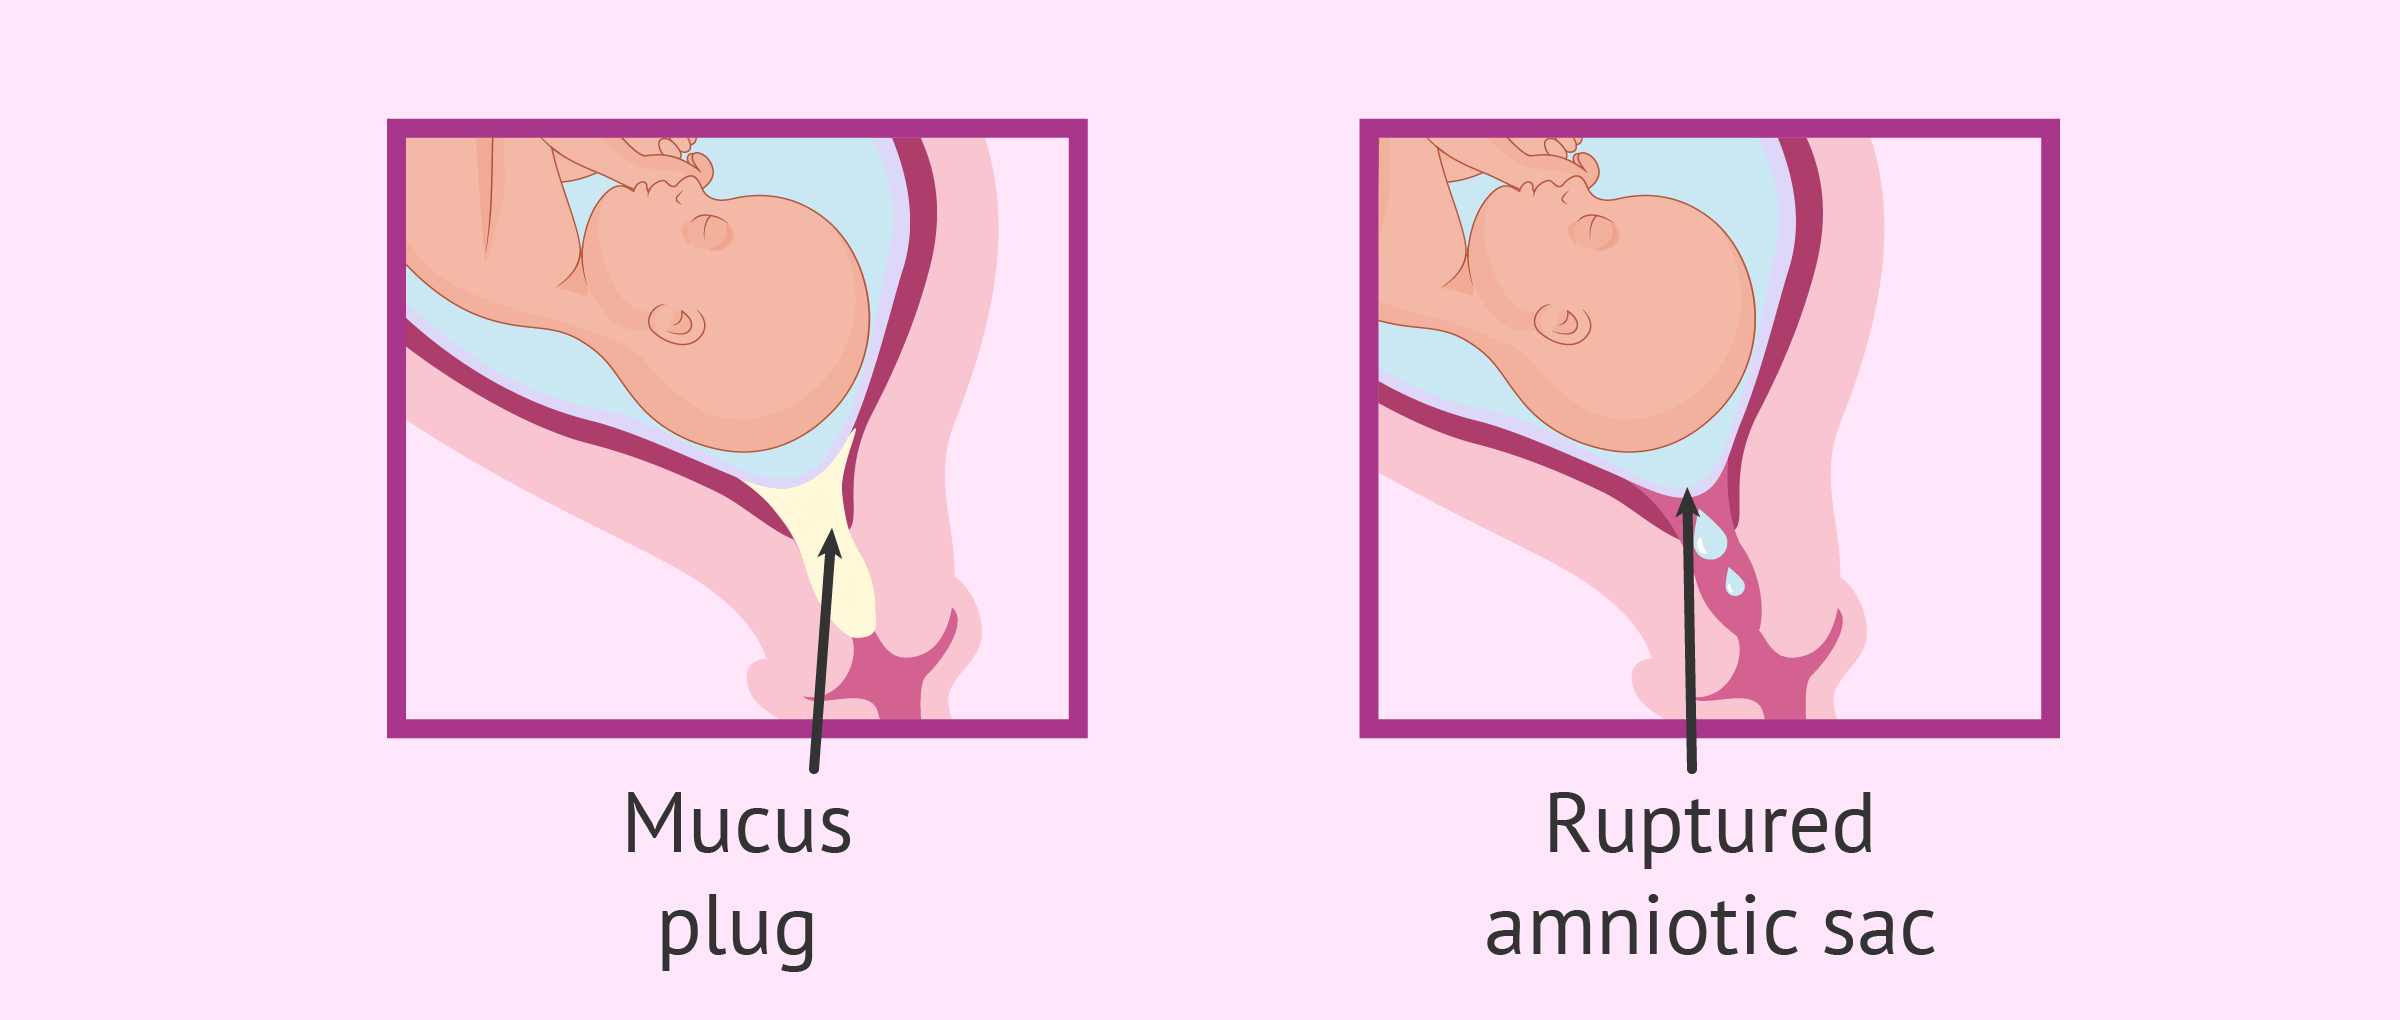 Mucus plug and water breaking